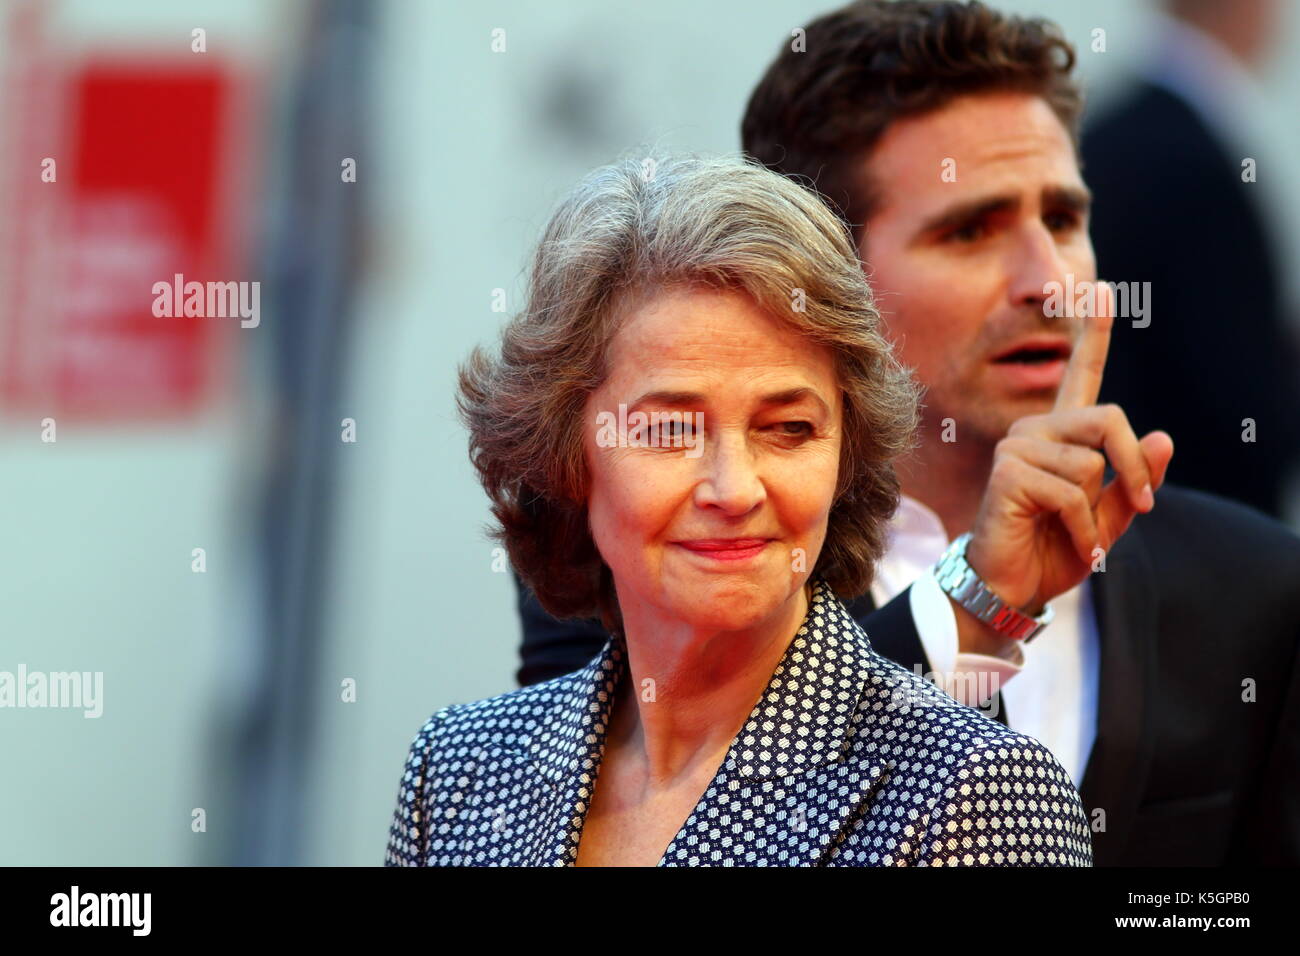 Venice, Italy. 9th September, 2017. Actress Charlotte Rampling attends at the Award Ceremony during the 74th Venice International Film Festival at Lido of Venice on 9th September, 2017. Credit: Andrea Spinelli/Alamy Live News Stock Photo